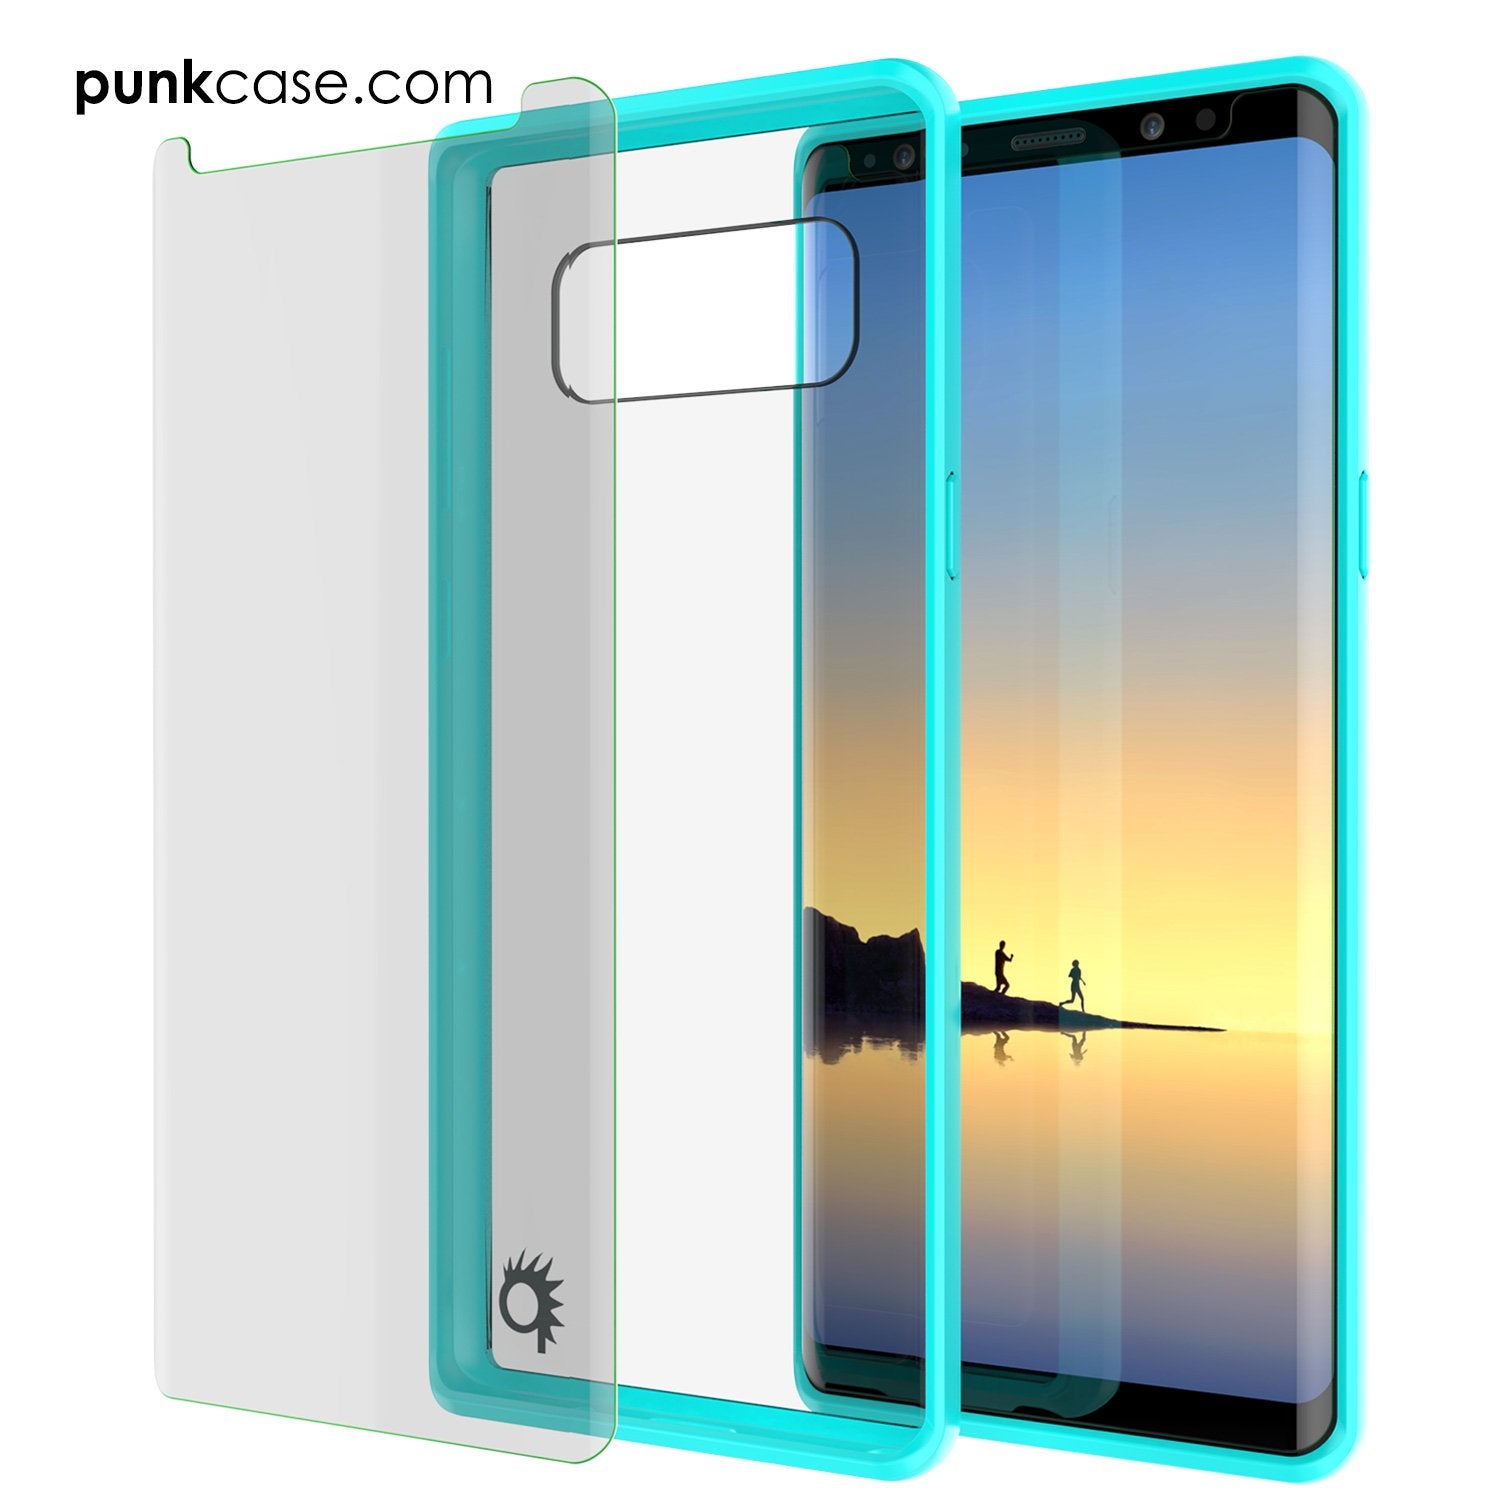 Galaxy Note 8 Case, PUNKcase [LUCID 2.0 Series] [Slim Fit] Armor Cover w/Integrated Anti-Shock System & PUNKSHIELD Screen Protector [Teal] - PunkCase NZ